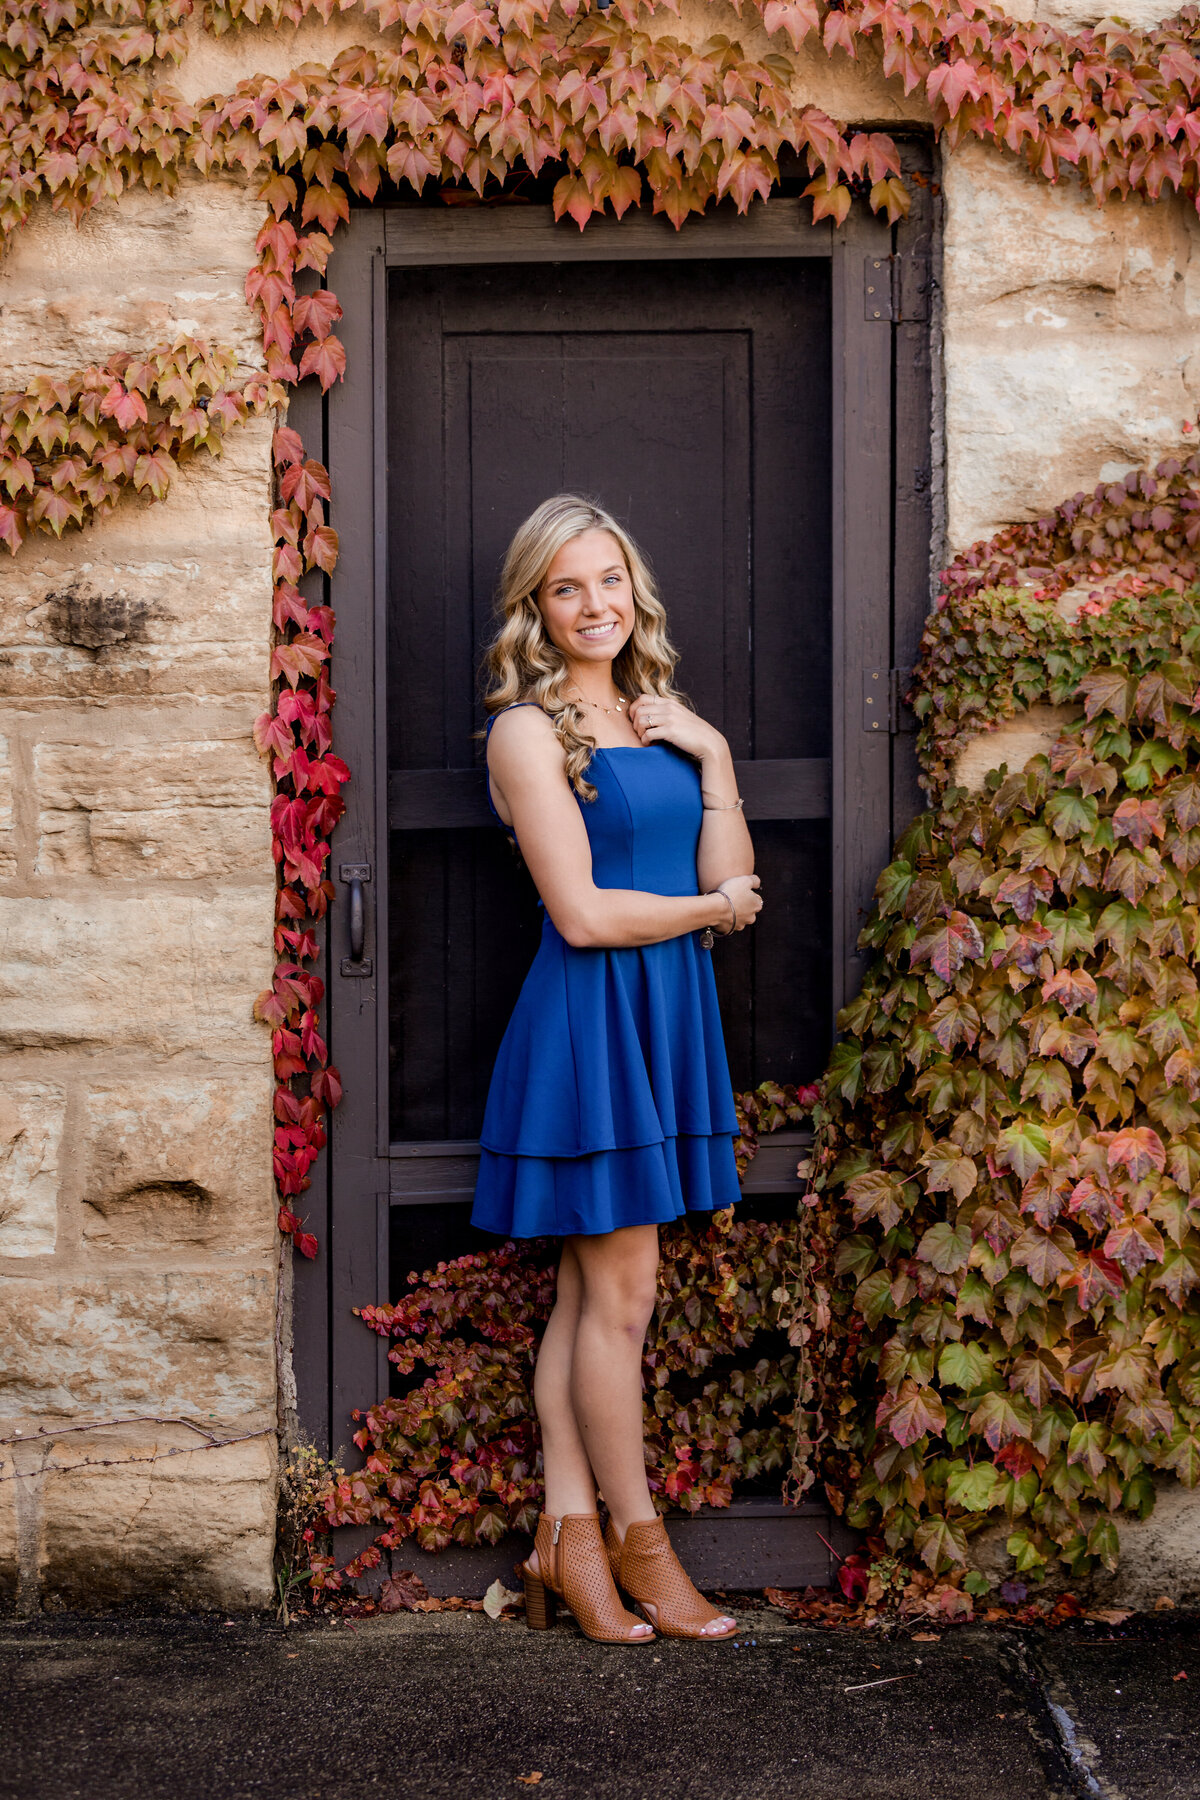 A blonde senior wears a blue dress while standing in front of a door surrounded by fall colored ivy with her ankles crossed.